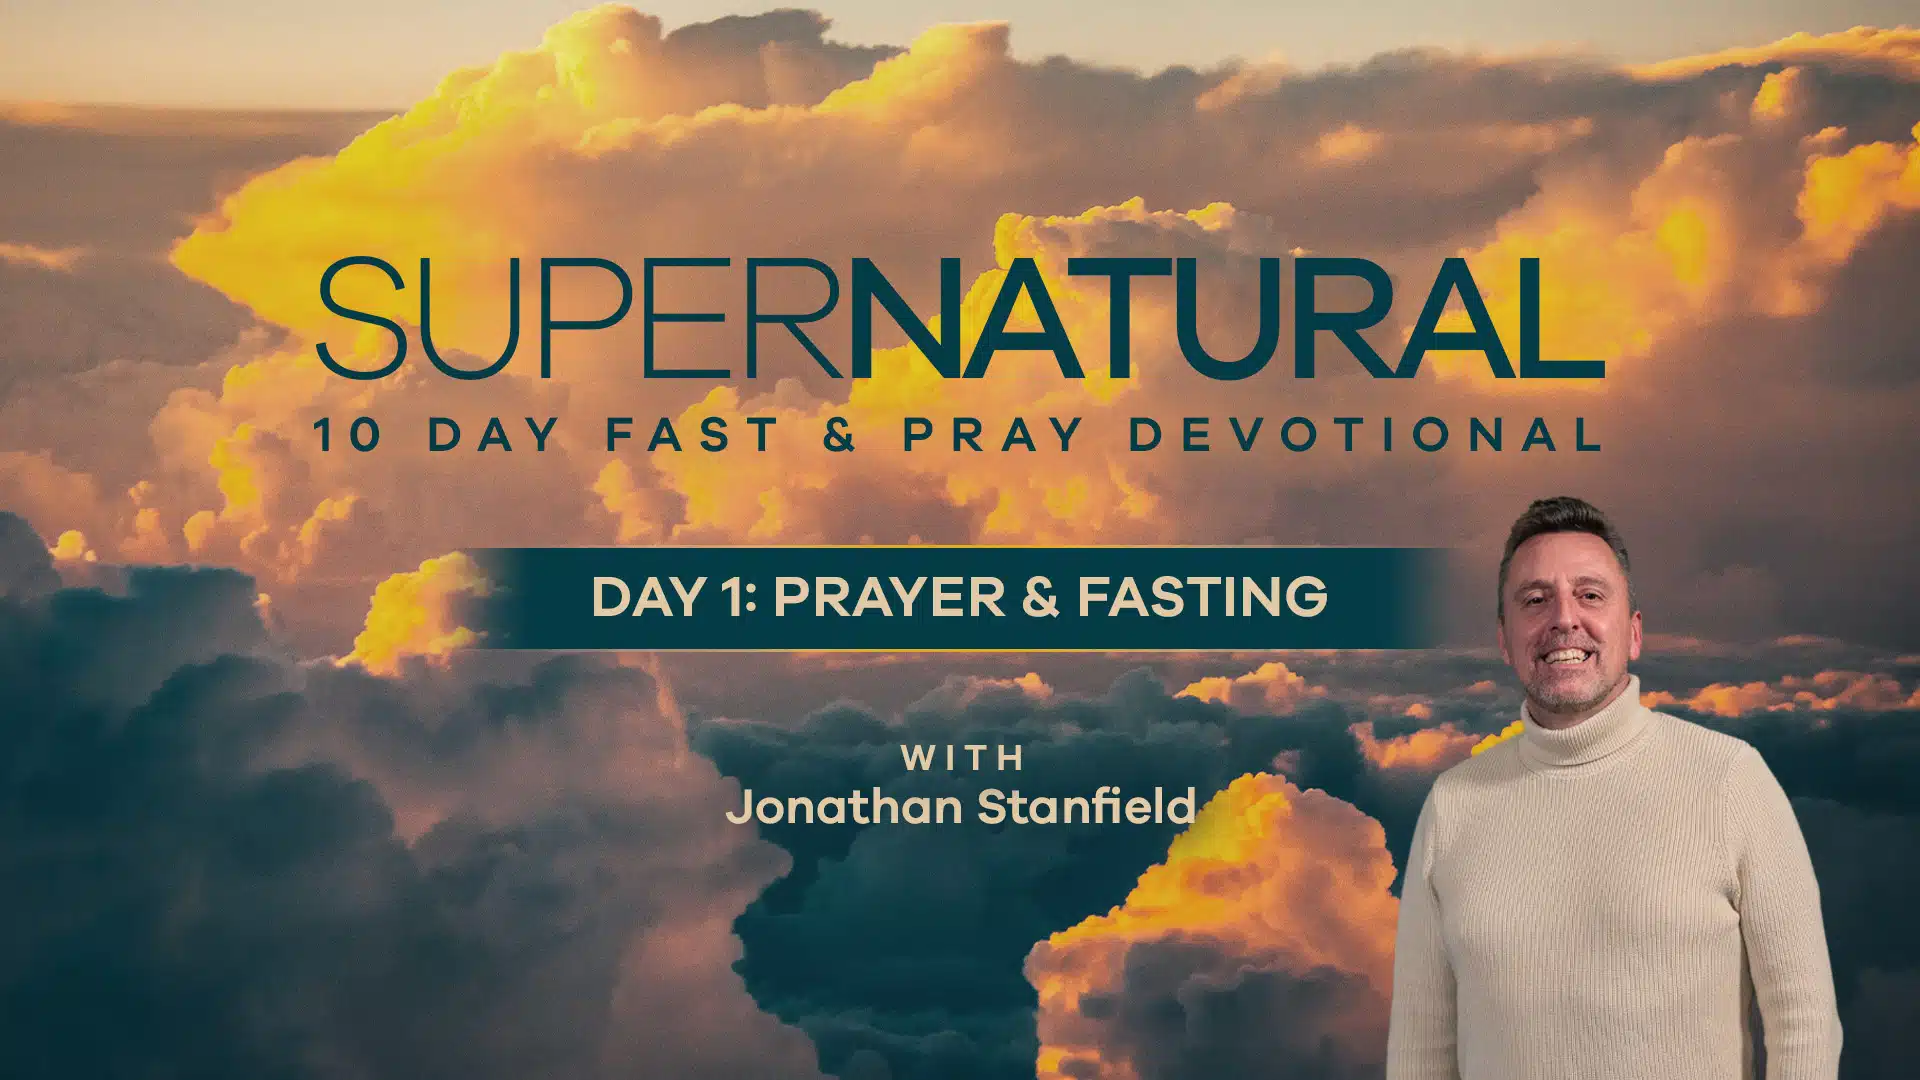 Video image for 'Day 1: Prayer & Fasting'' of the 10-Day Supernatural Devotional about prayer & fasting.